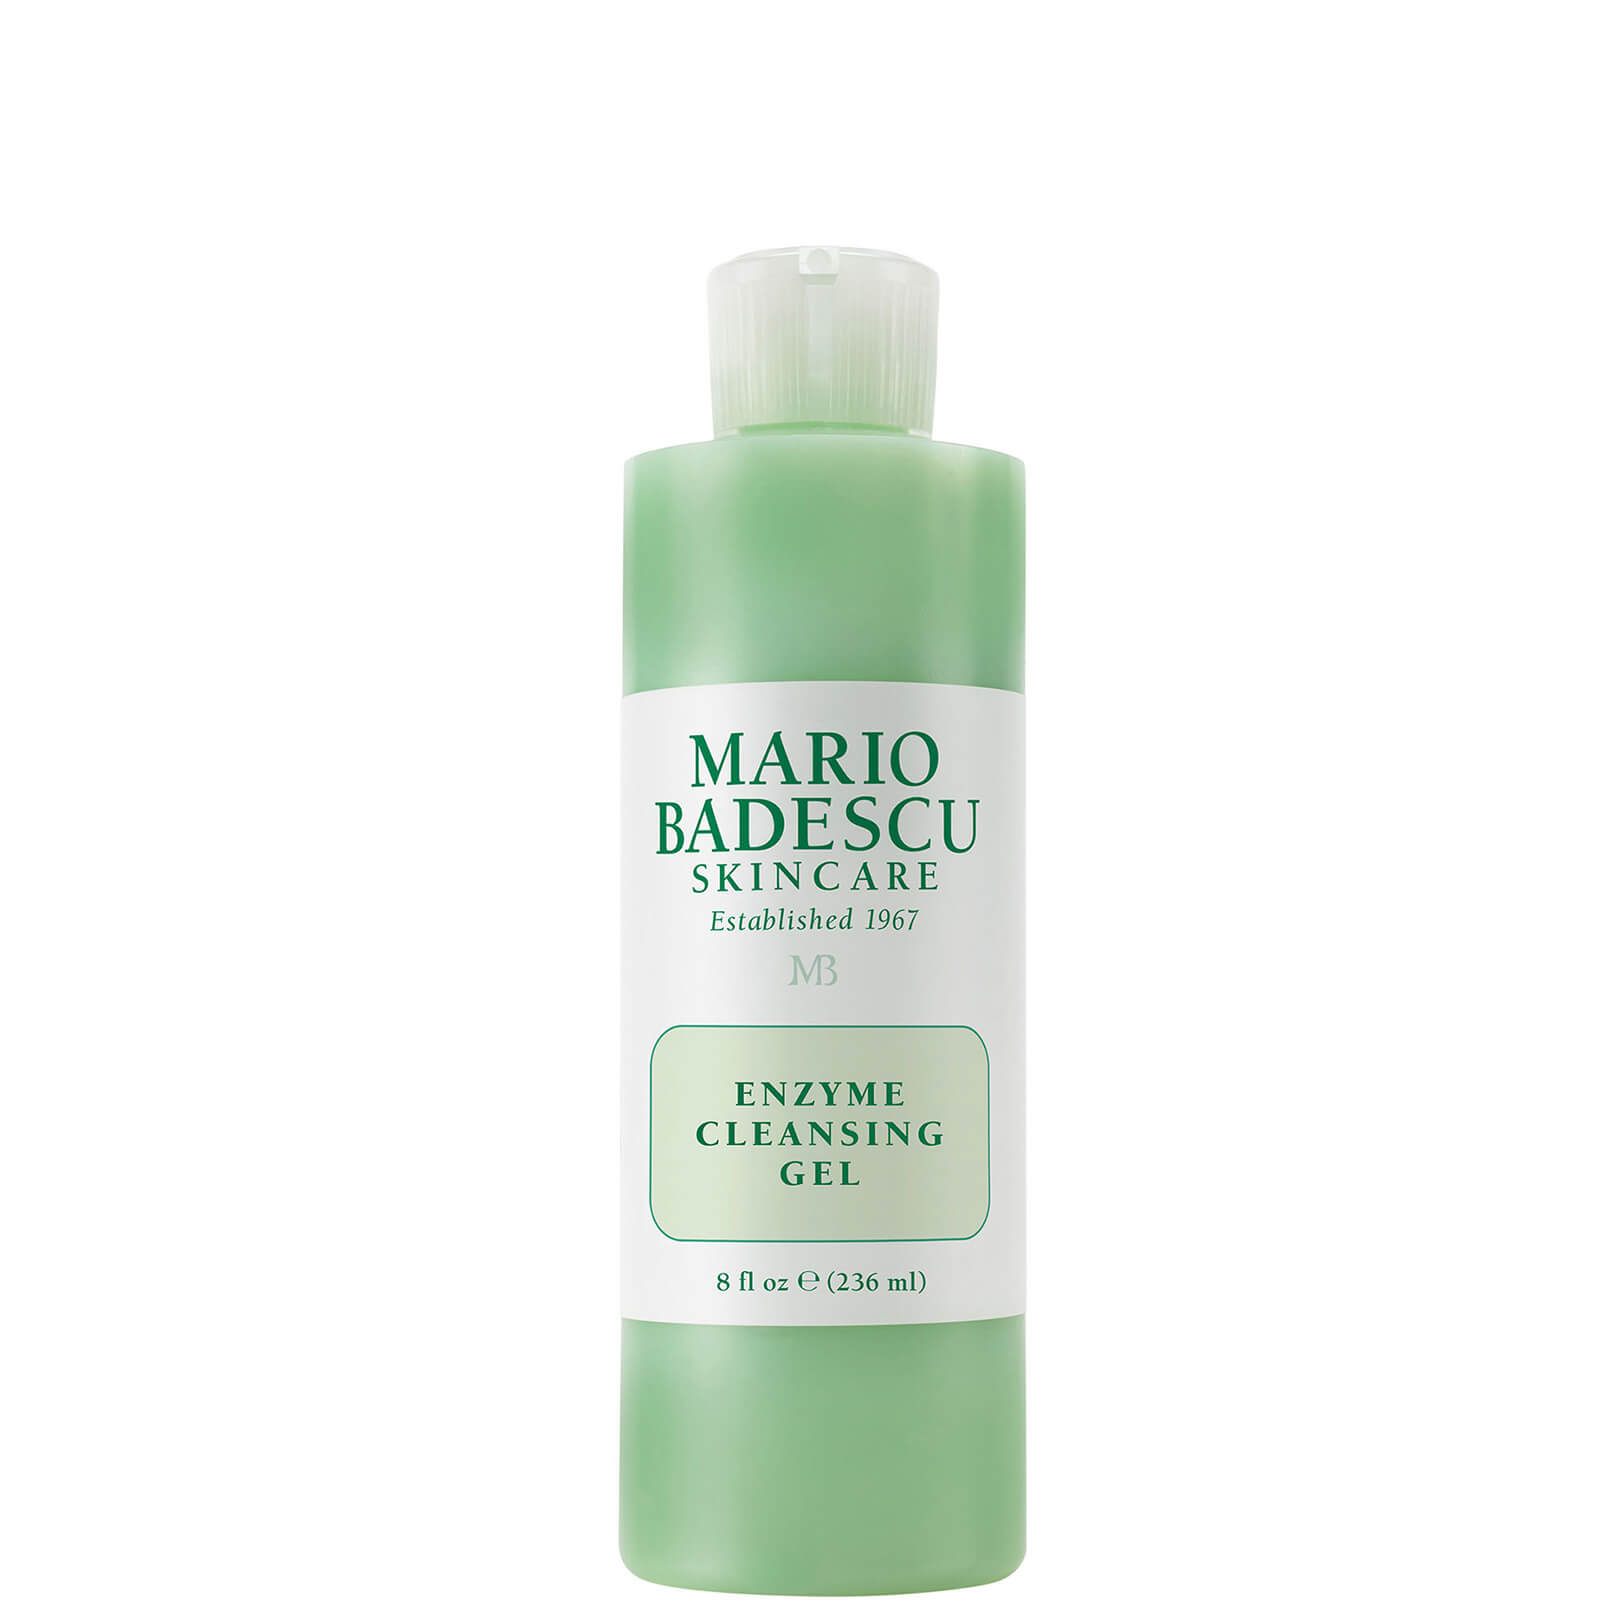 Photos - Facial / Body Cleansing Product Mario Badescu Enzyme Cleansing Gel - 236ml